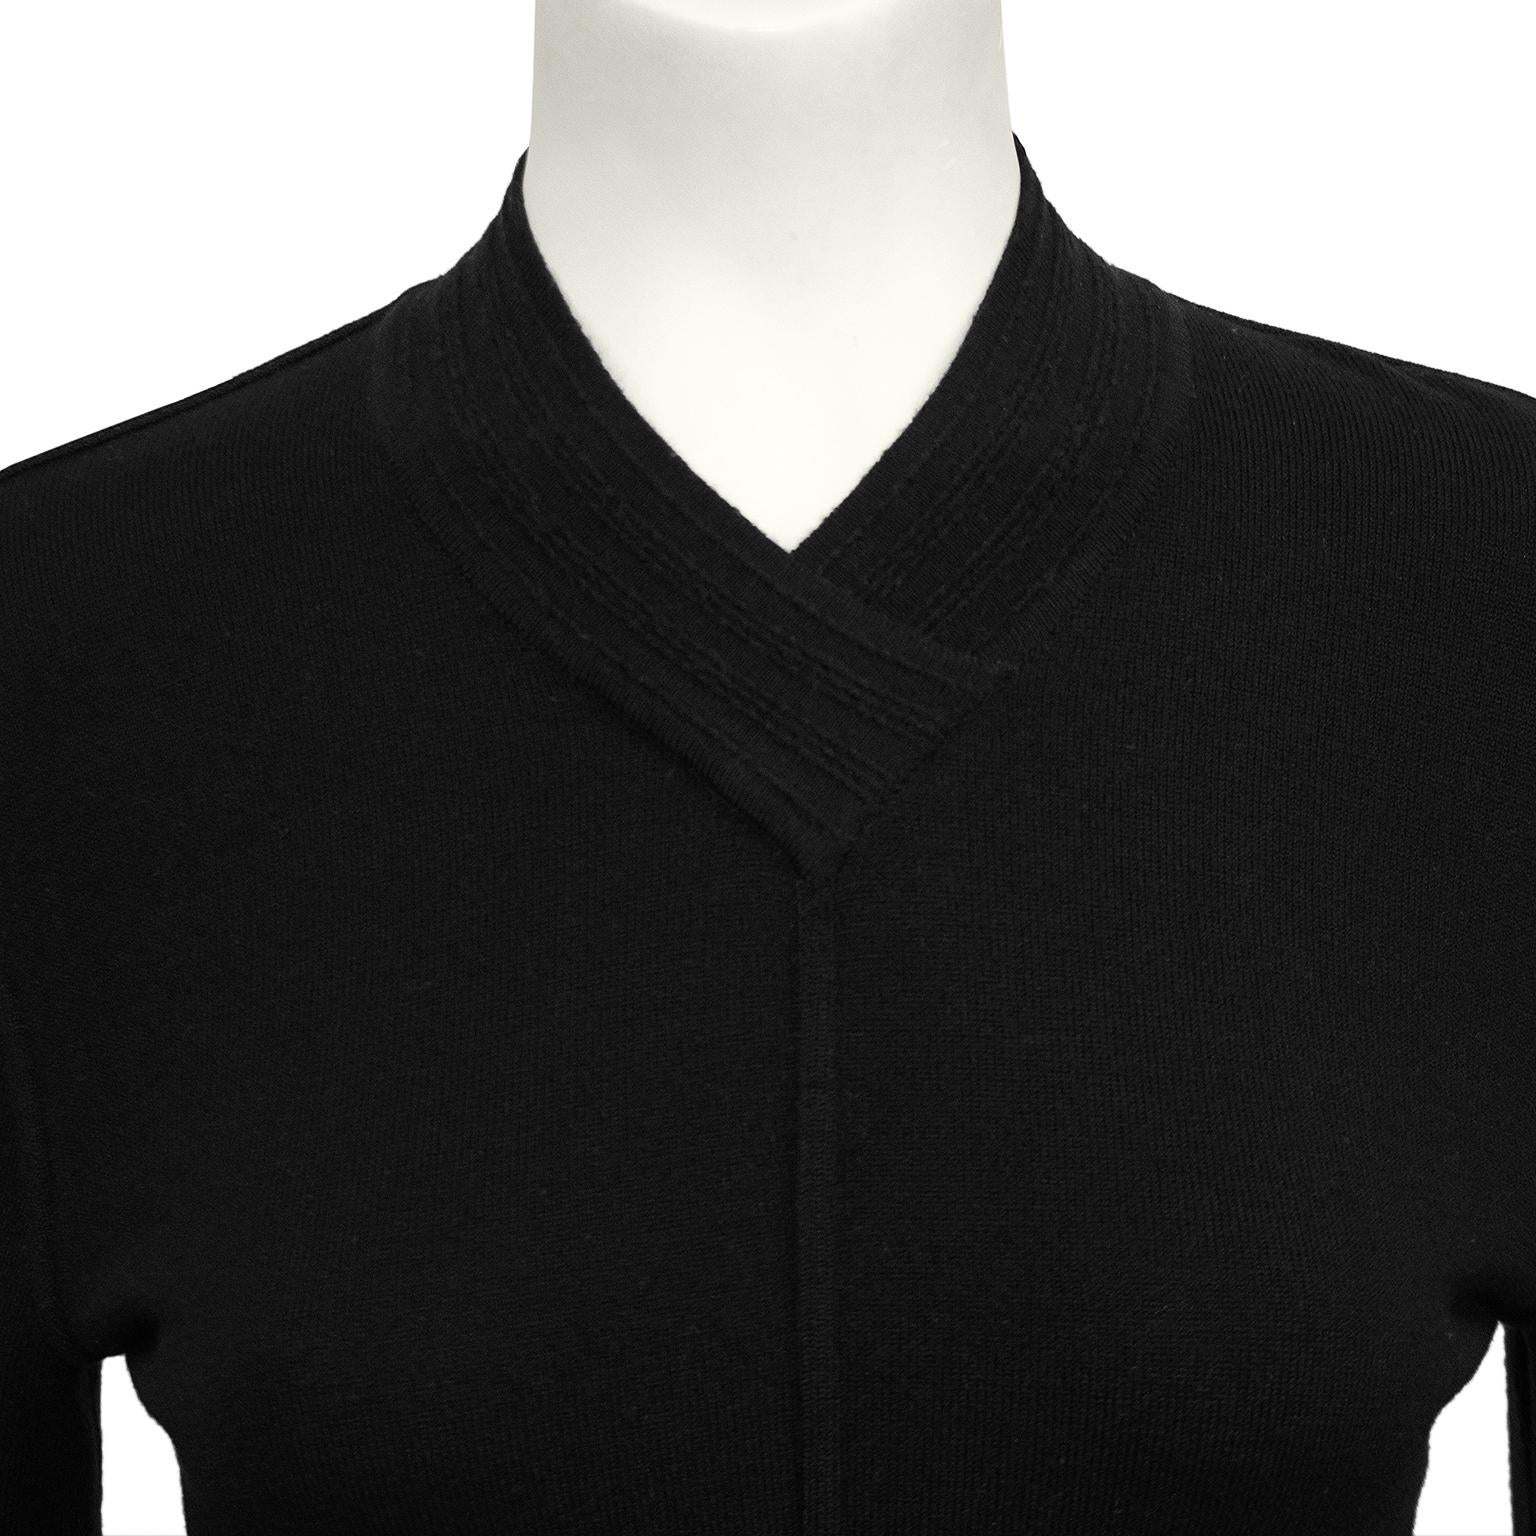 Fall 1991 Alaia Black Knit Jumpsuit In Good Condition For Sale In Toronto, Ontario